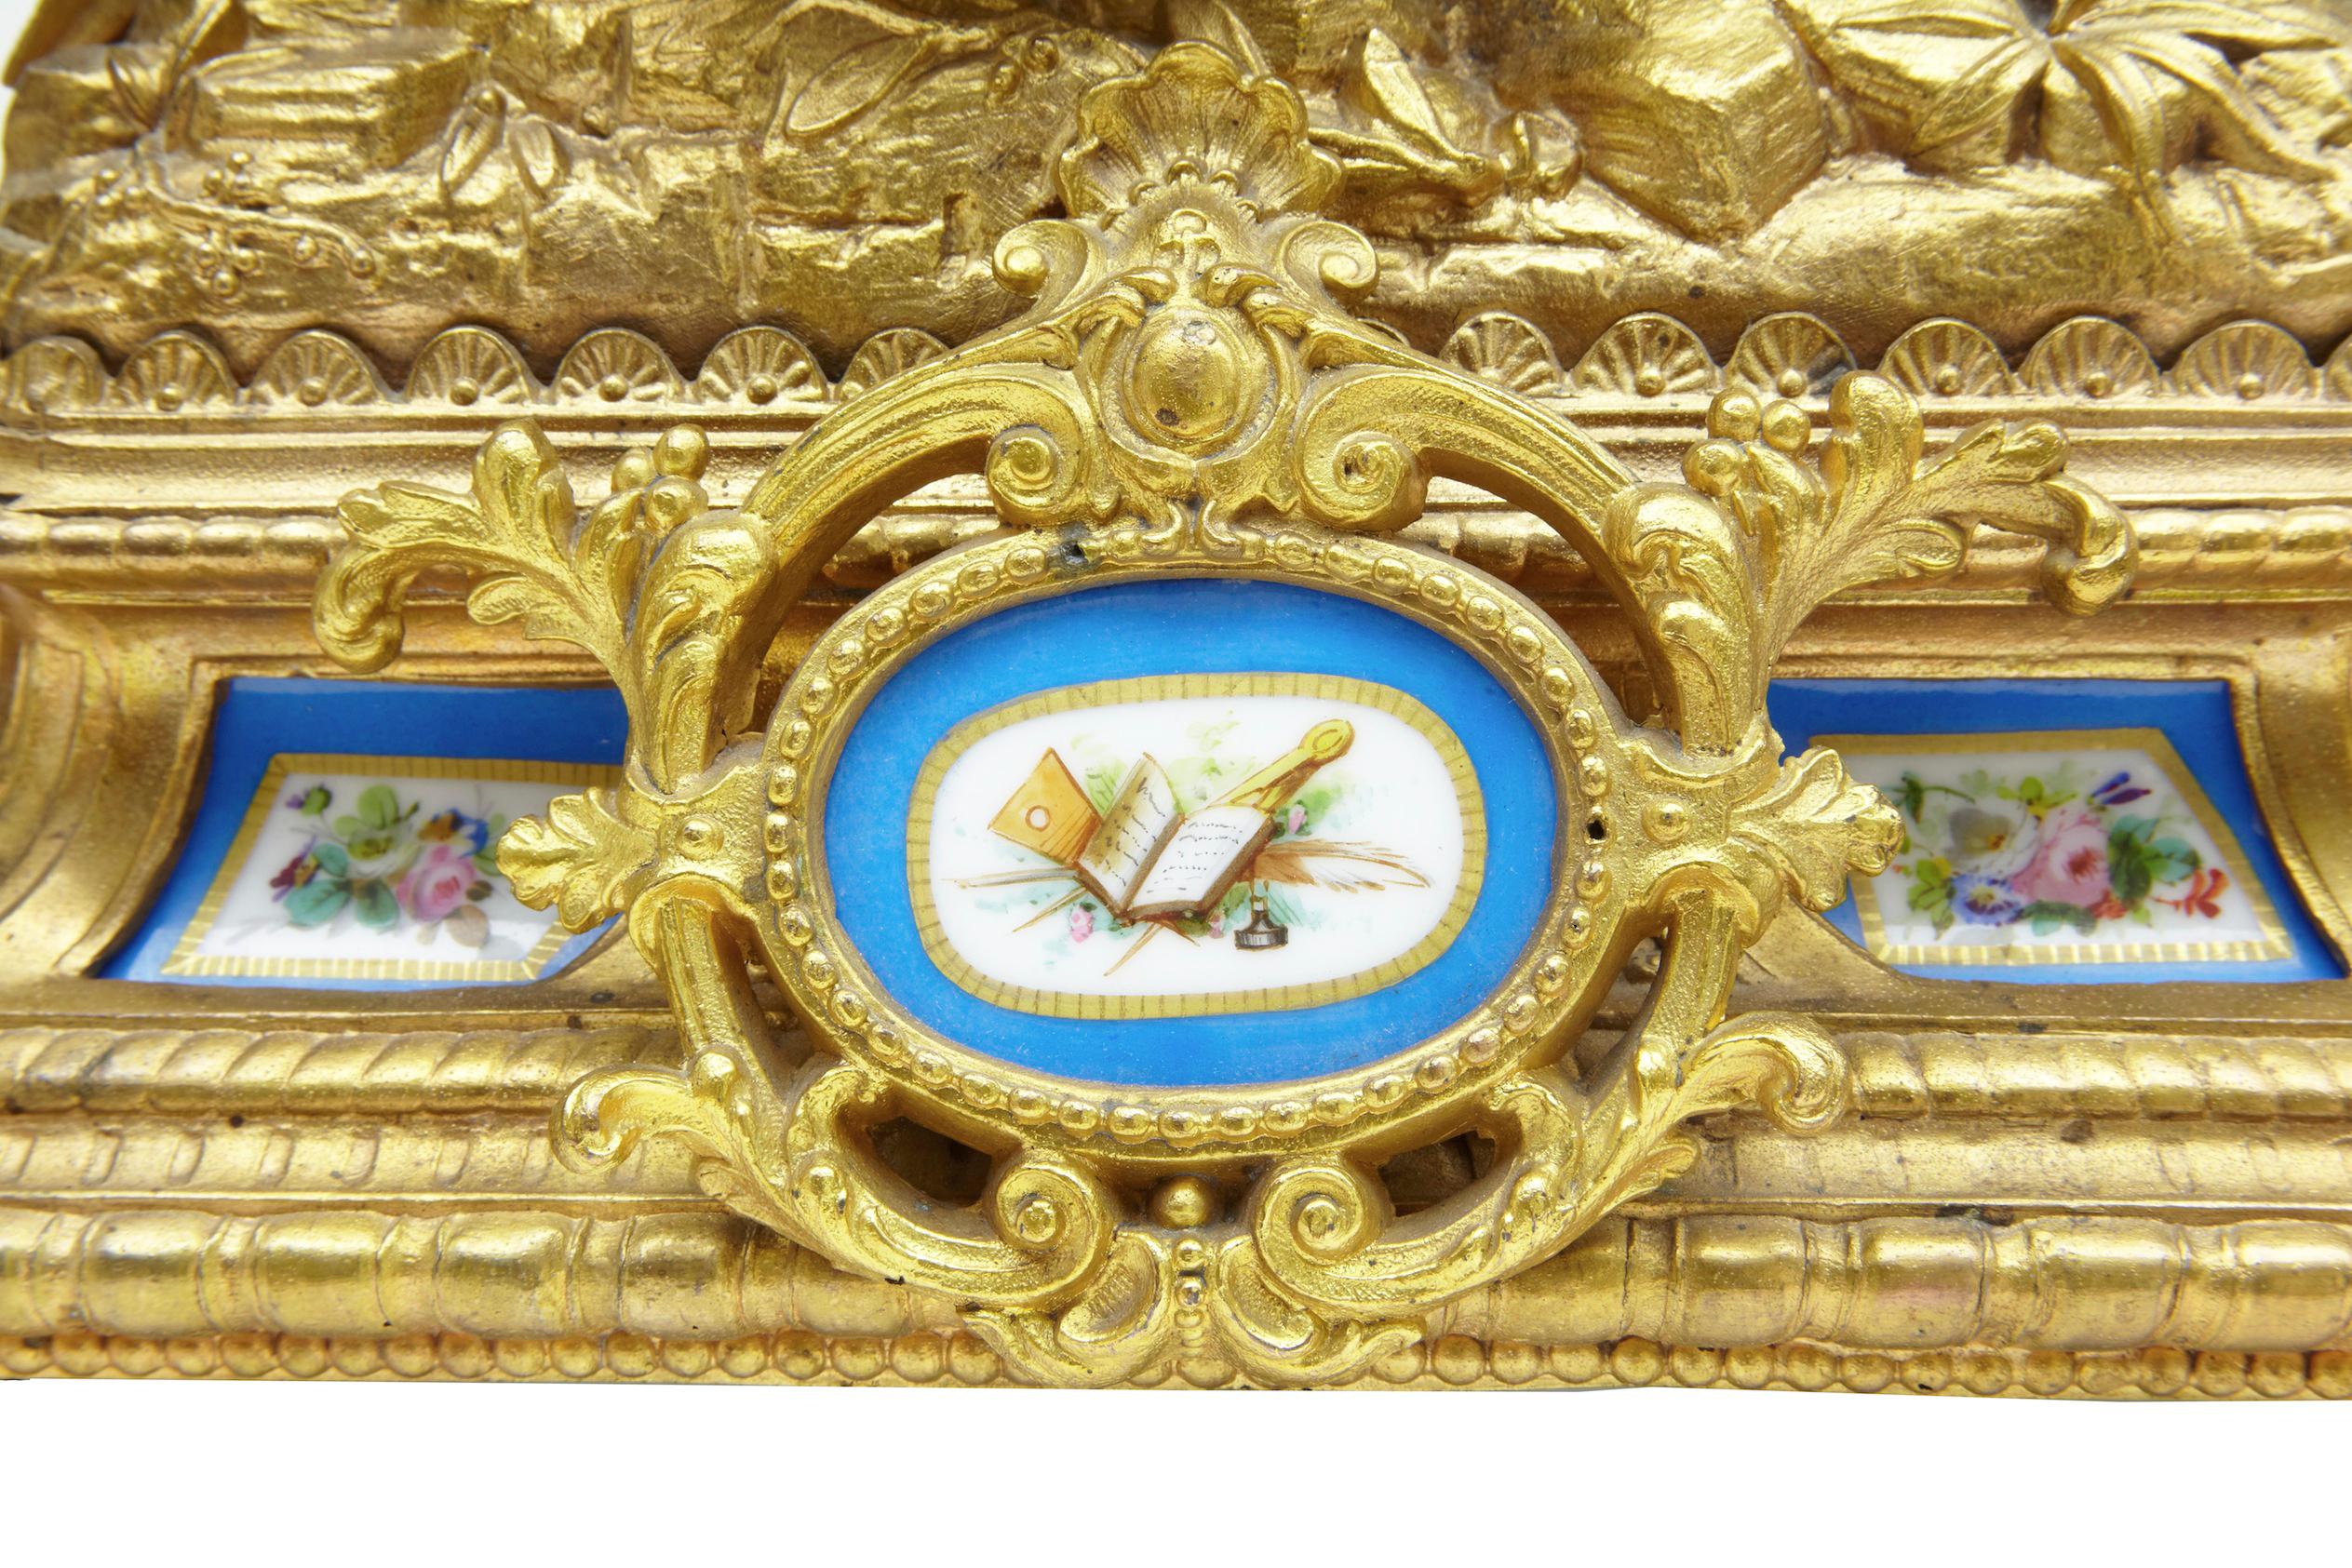 Ormolu 19th Century French Gilt Mantel Clock with Sèvres Plaques